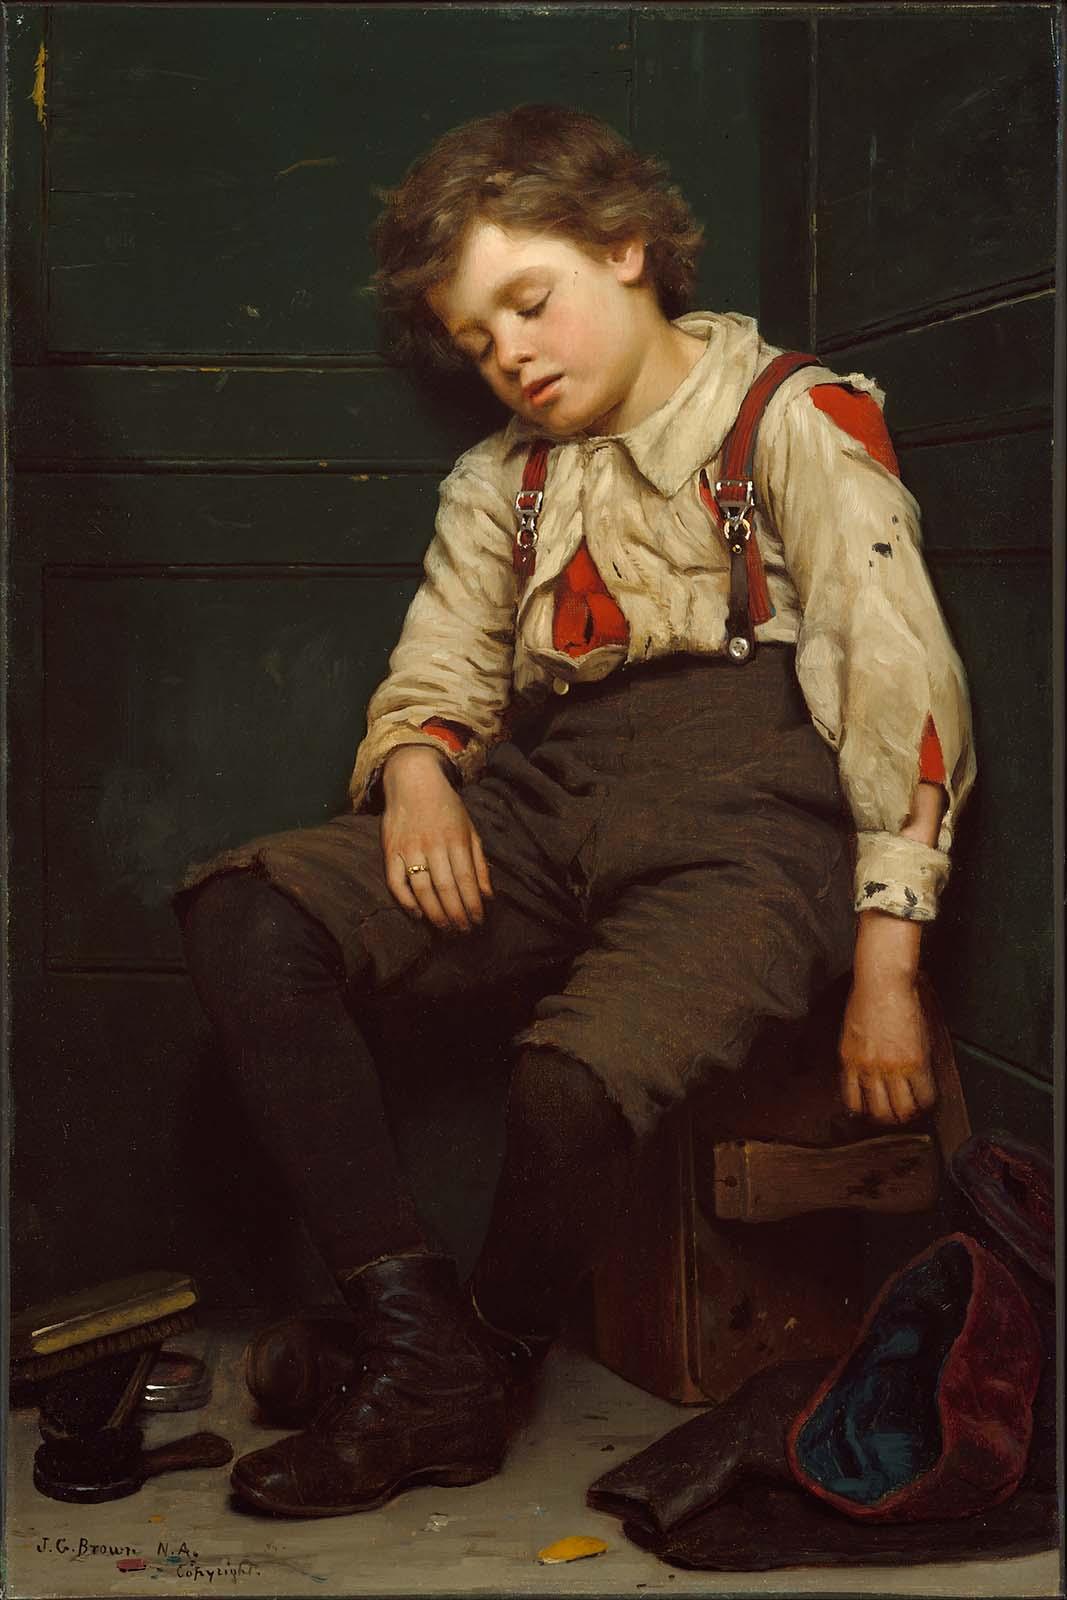 "Tuckered Out —The Shoeshine Boy," circa 1888, by John George Brown. Oil on canvas. Museum of Fine Arts Boston, Mass. (Public Domain)